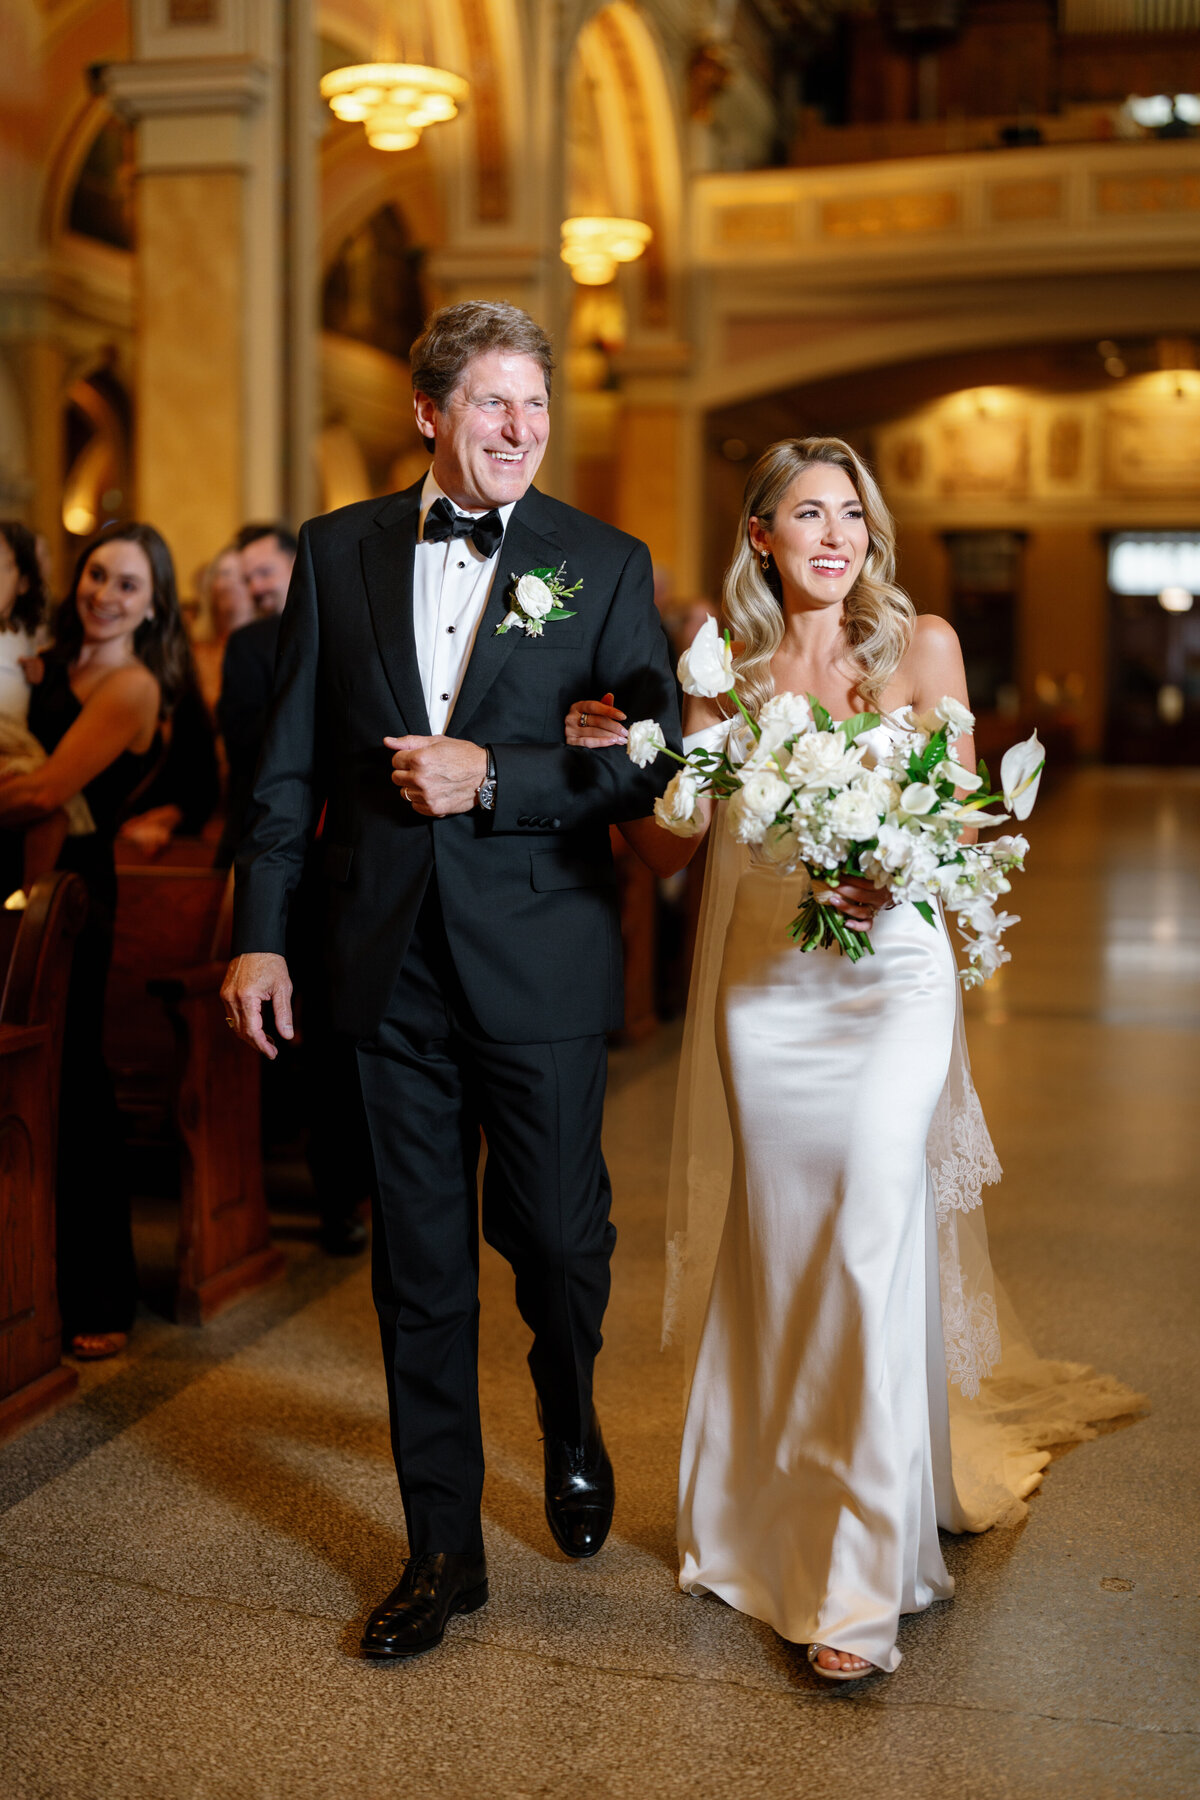 Aspen-Avenue-Chicago-Wedding-Photographer-Chicago-Athletic-Association-Simplicitee-XO-Design-Co-St-Mary-of-the-Angels-Church-Anomalie-Beauty-Timeless-Vogue-67